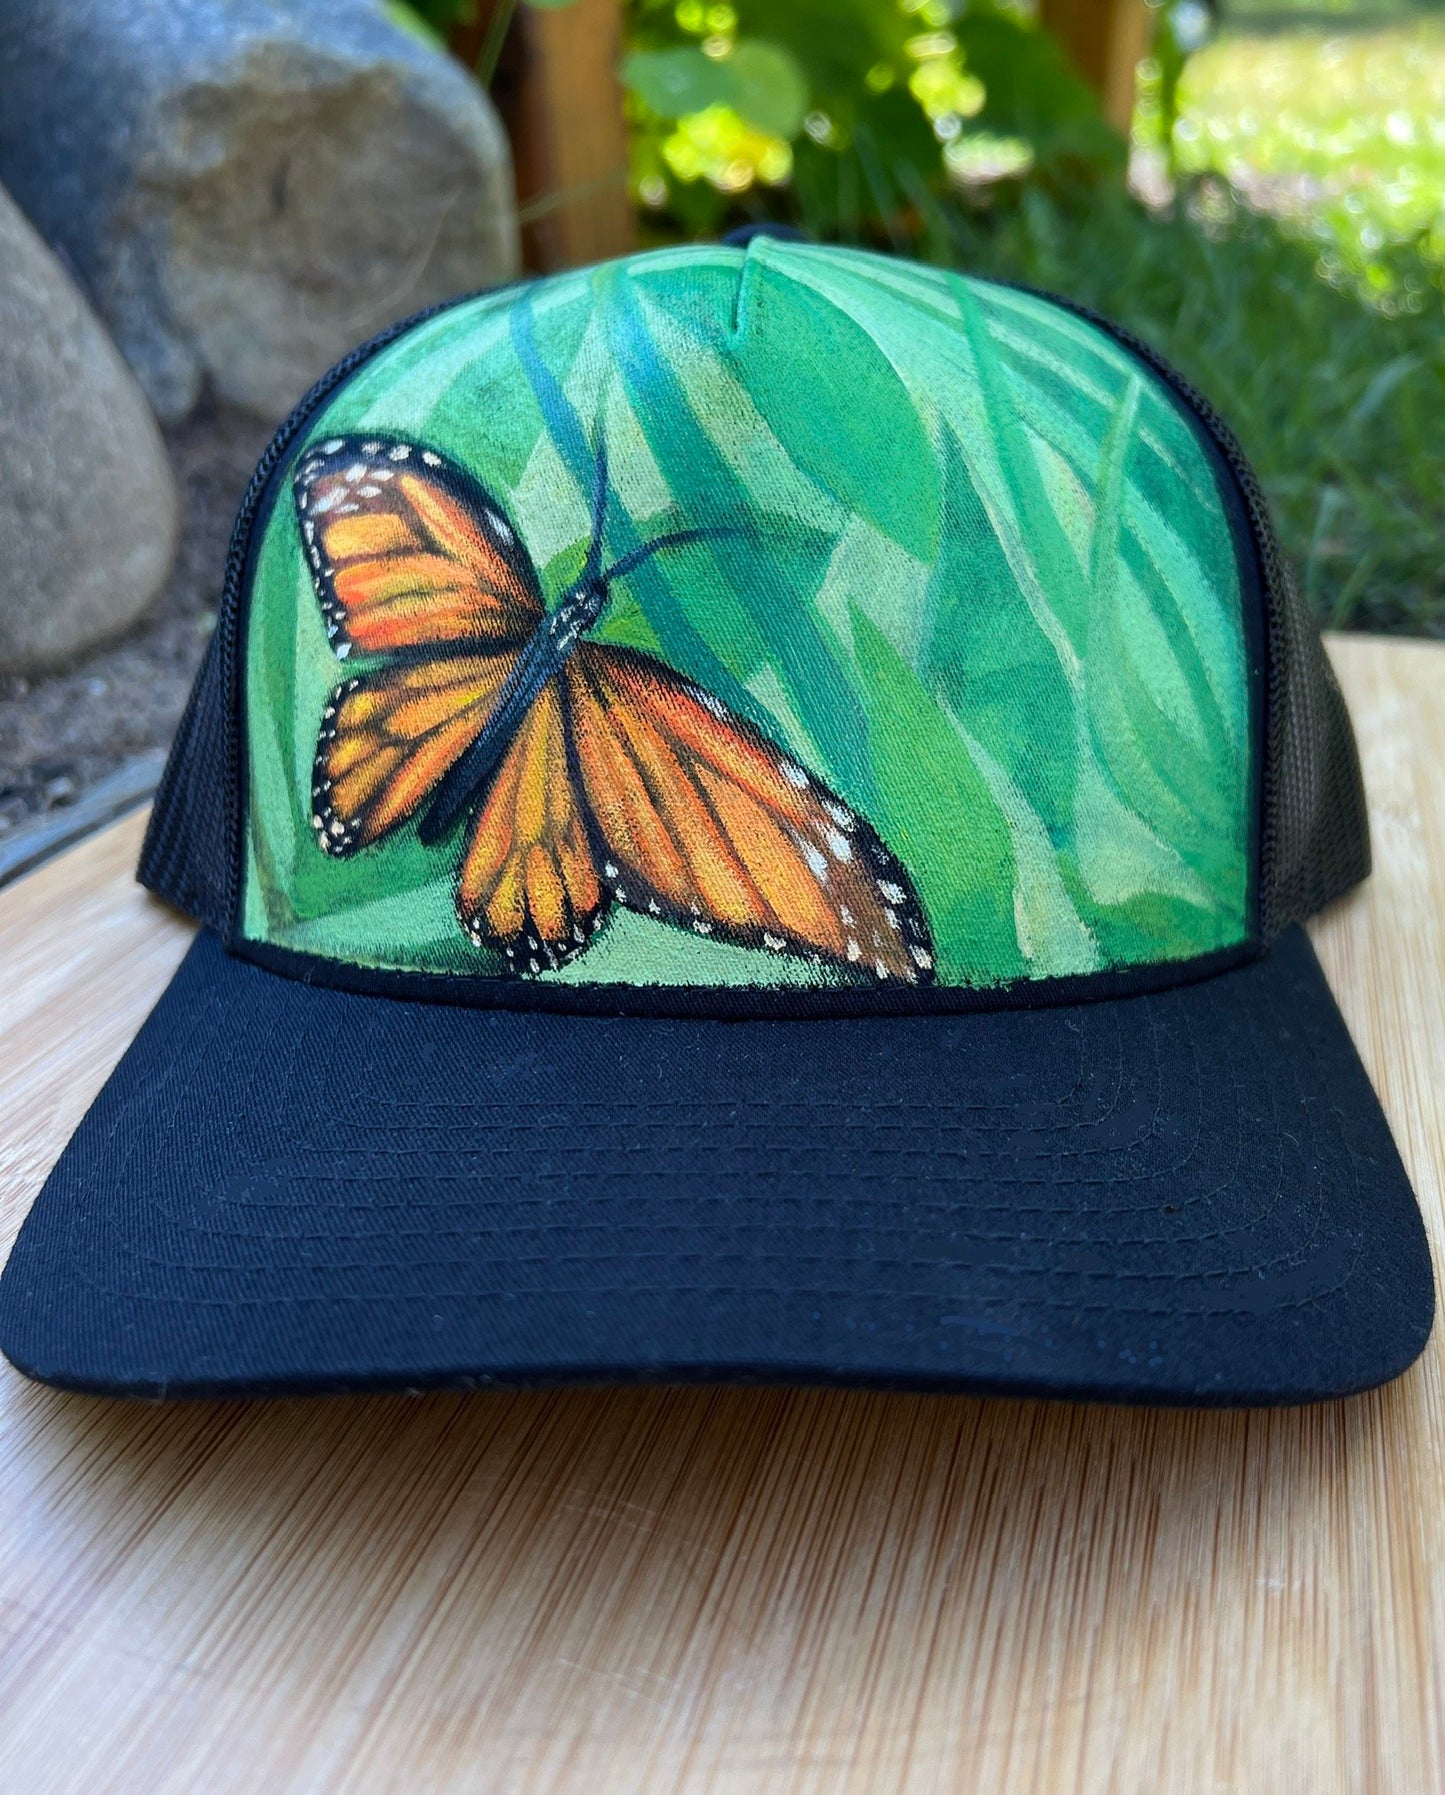 "Flutter By" Hand Painted Hat